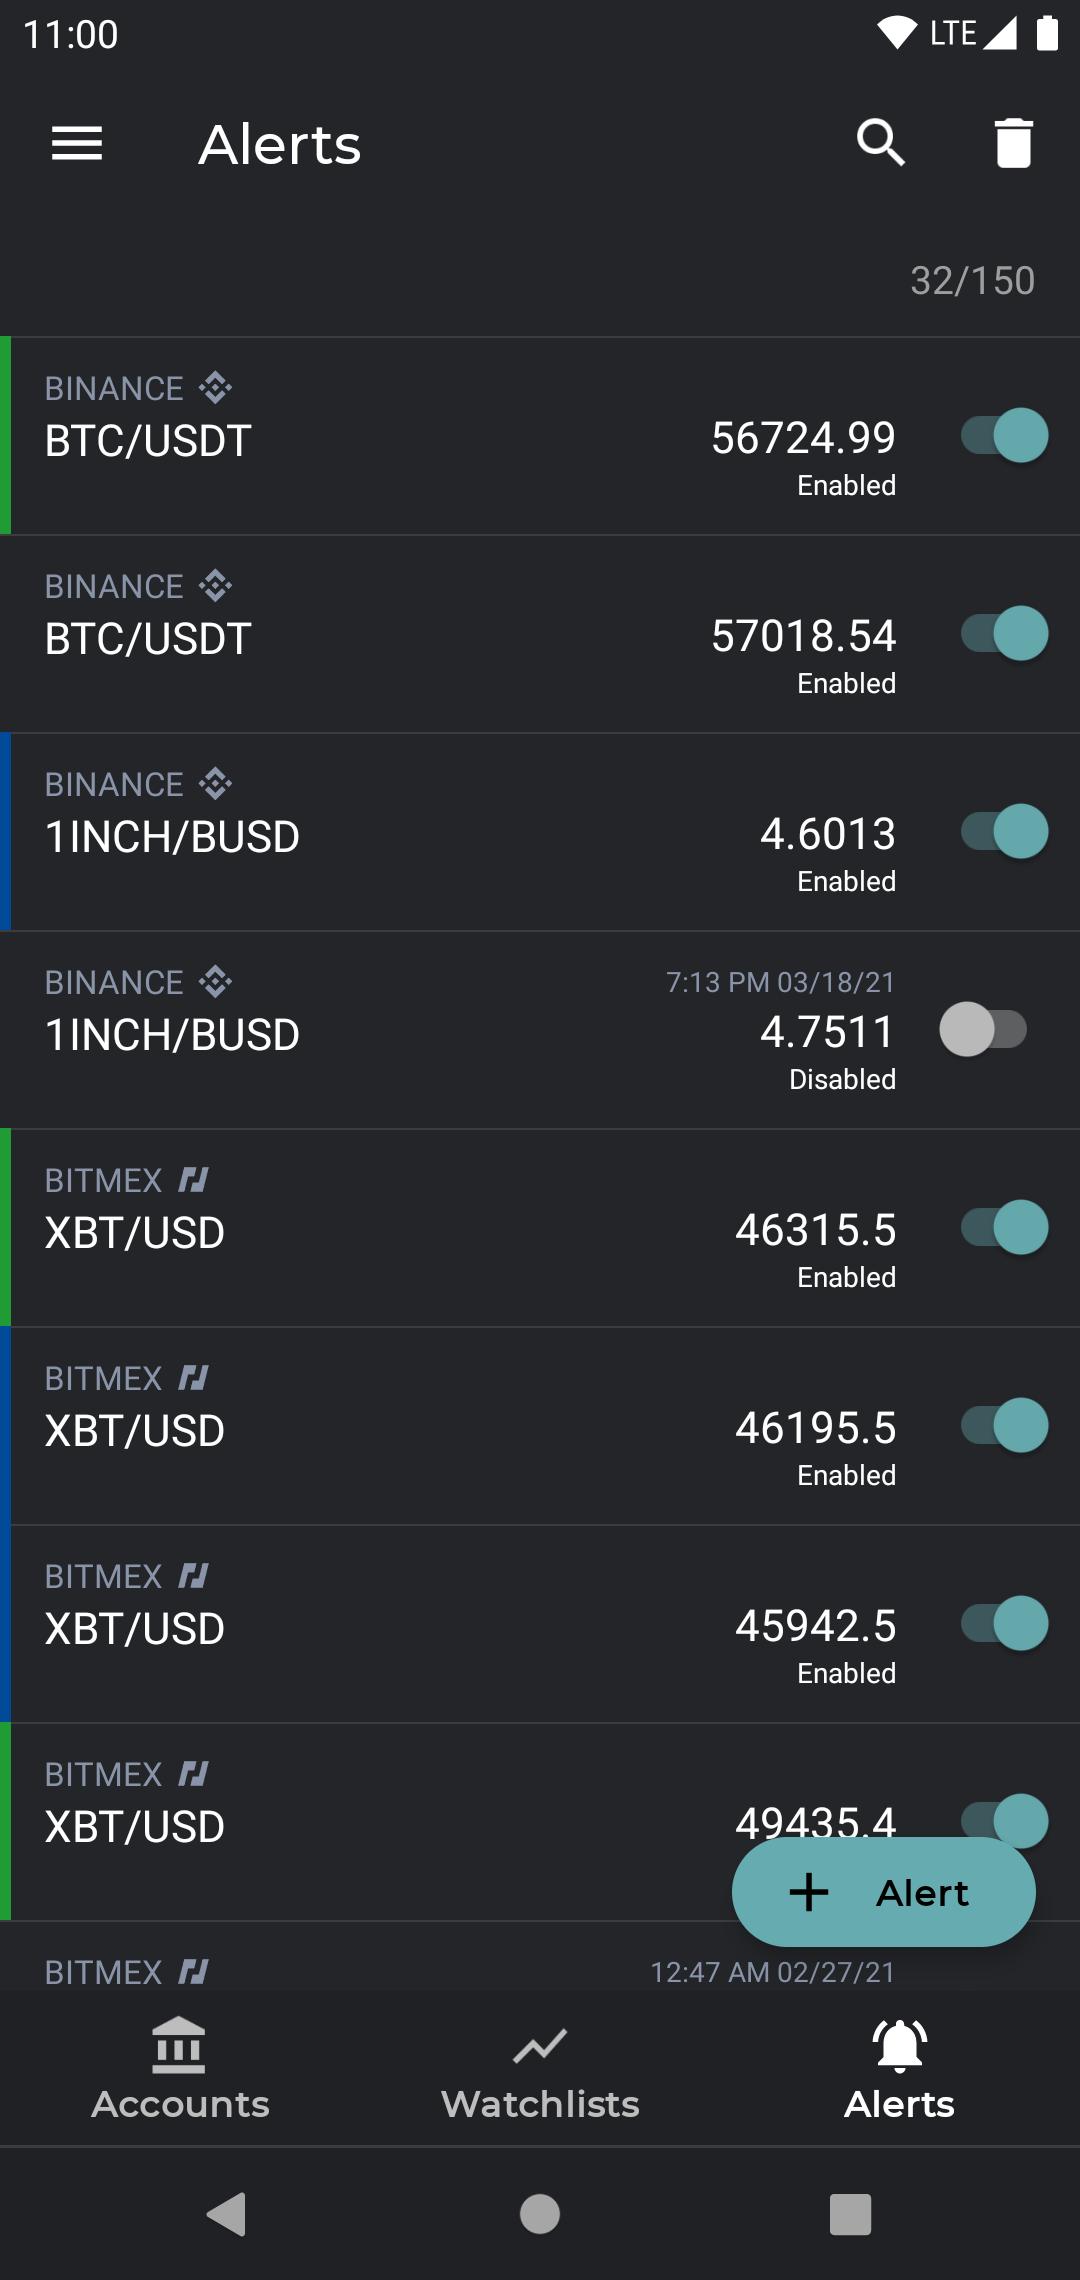 TabTrader Buy Bitcoin and Ethereum on exchanges 4.8.3 Screenshot 5